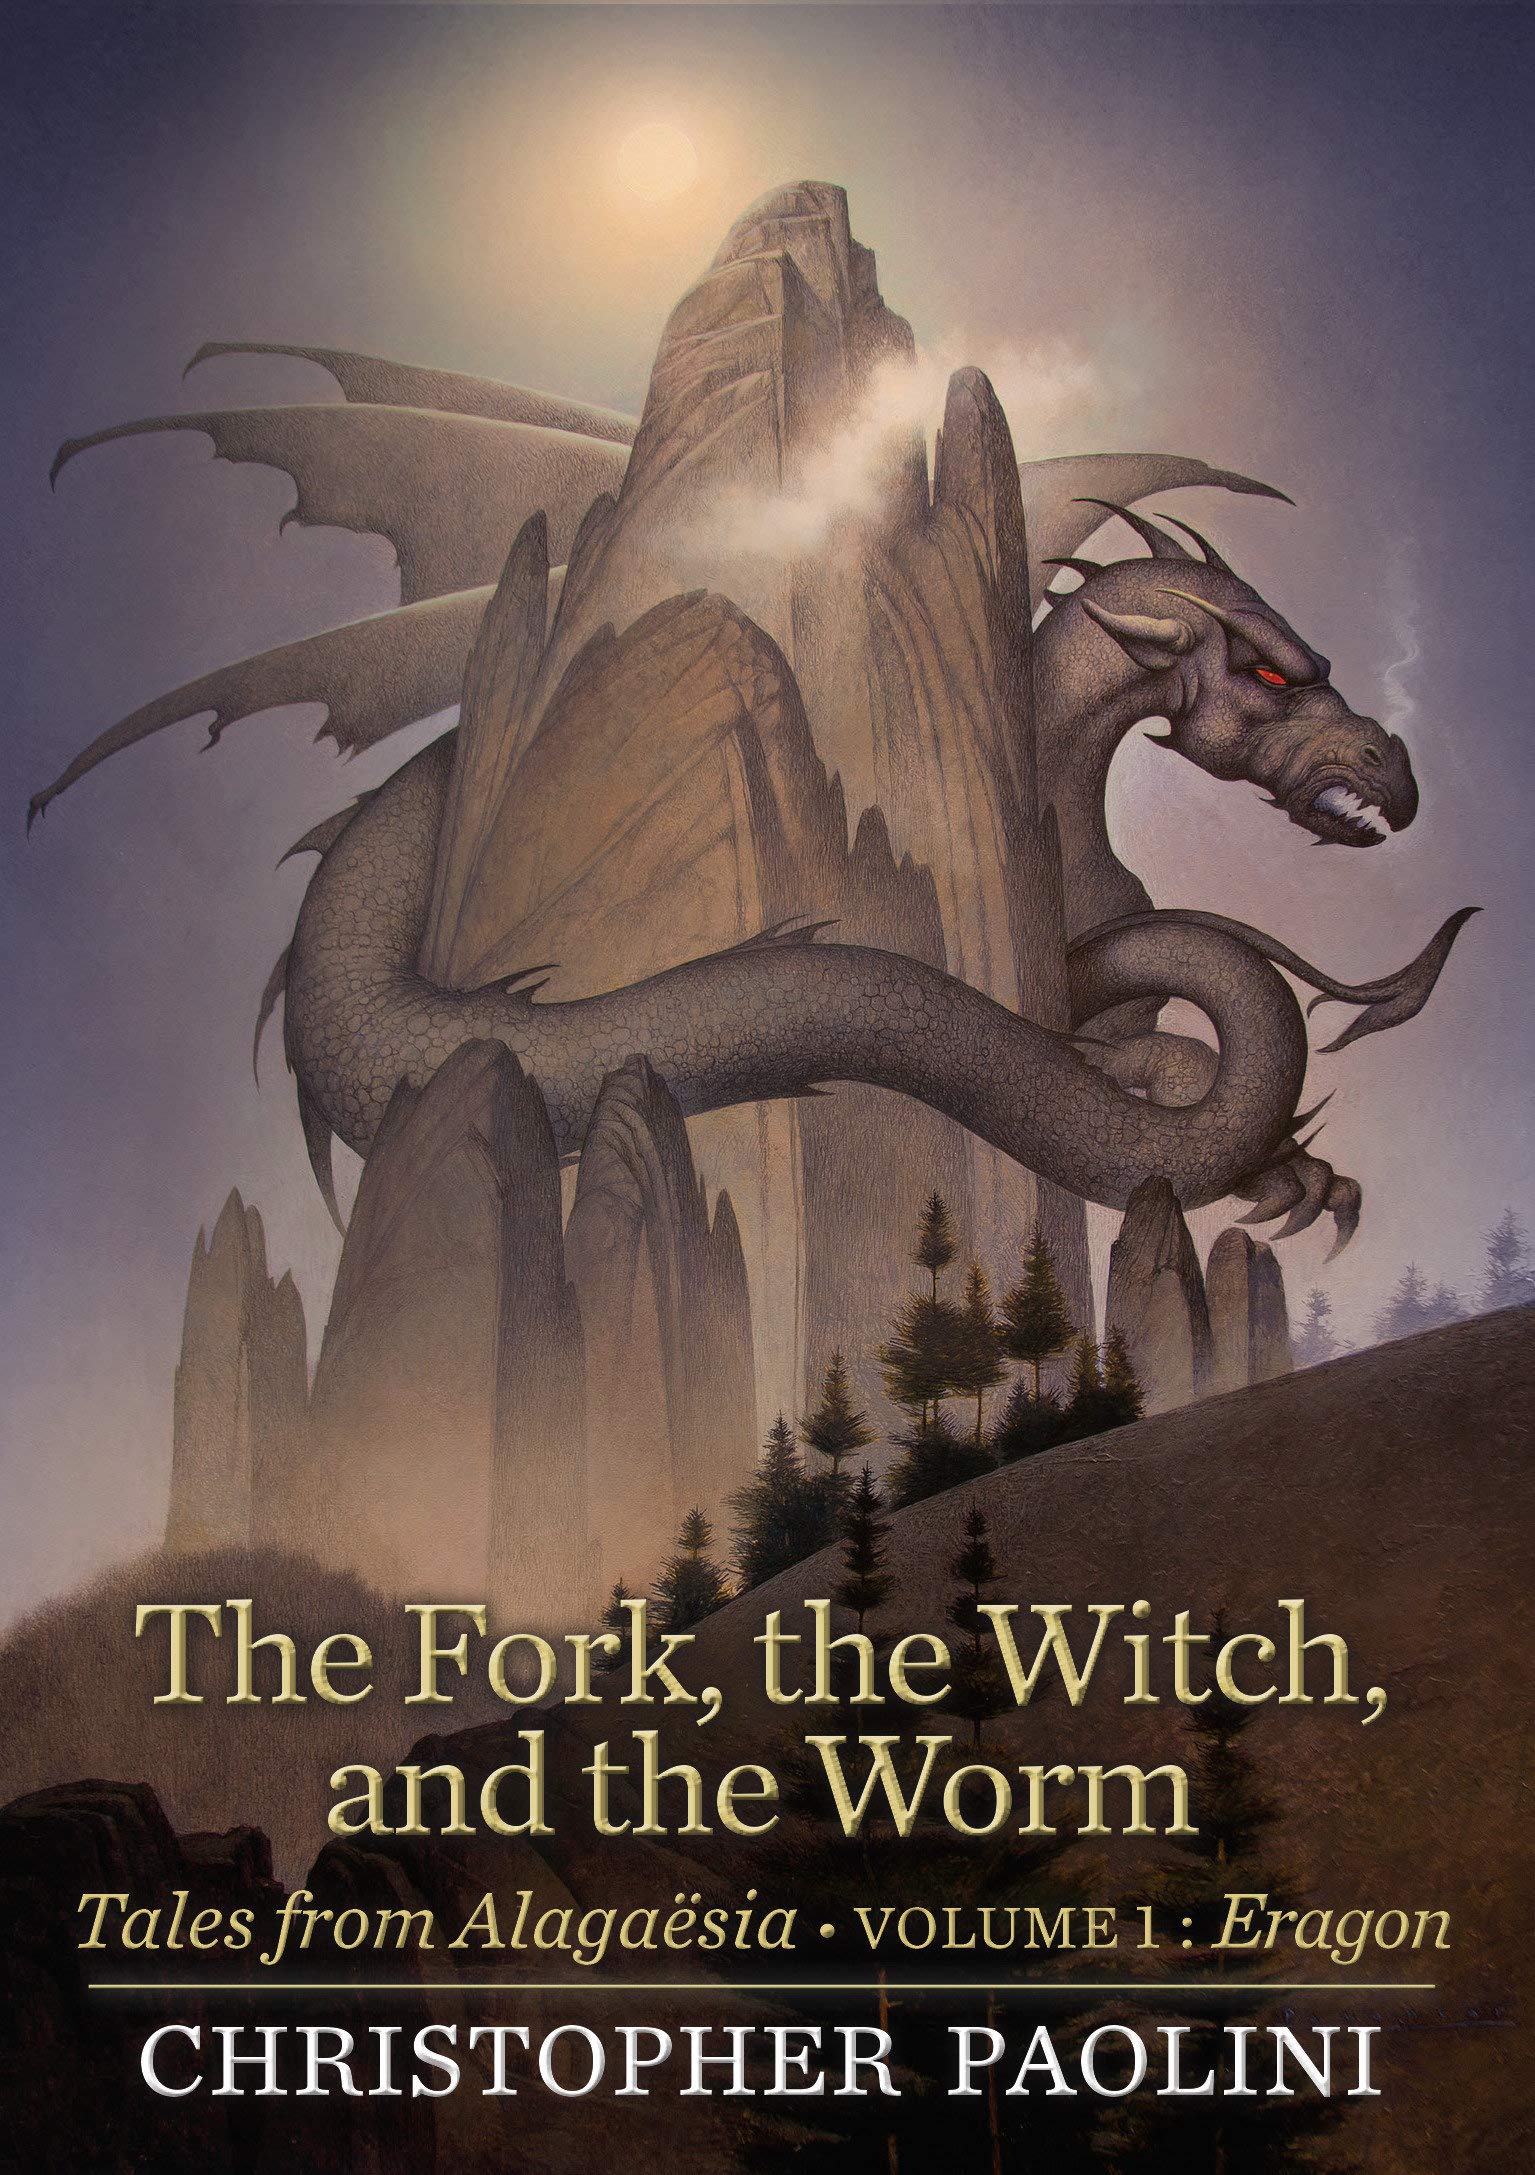 The Fork, the Witch, and the Worm - Volumul 1